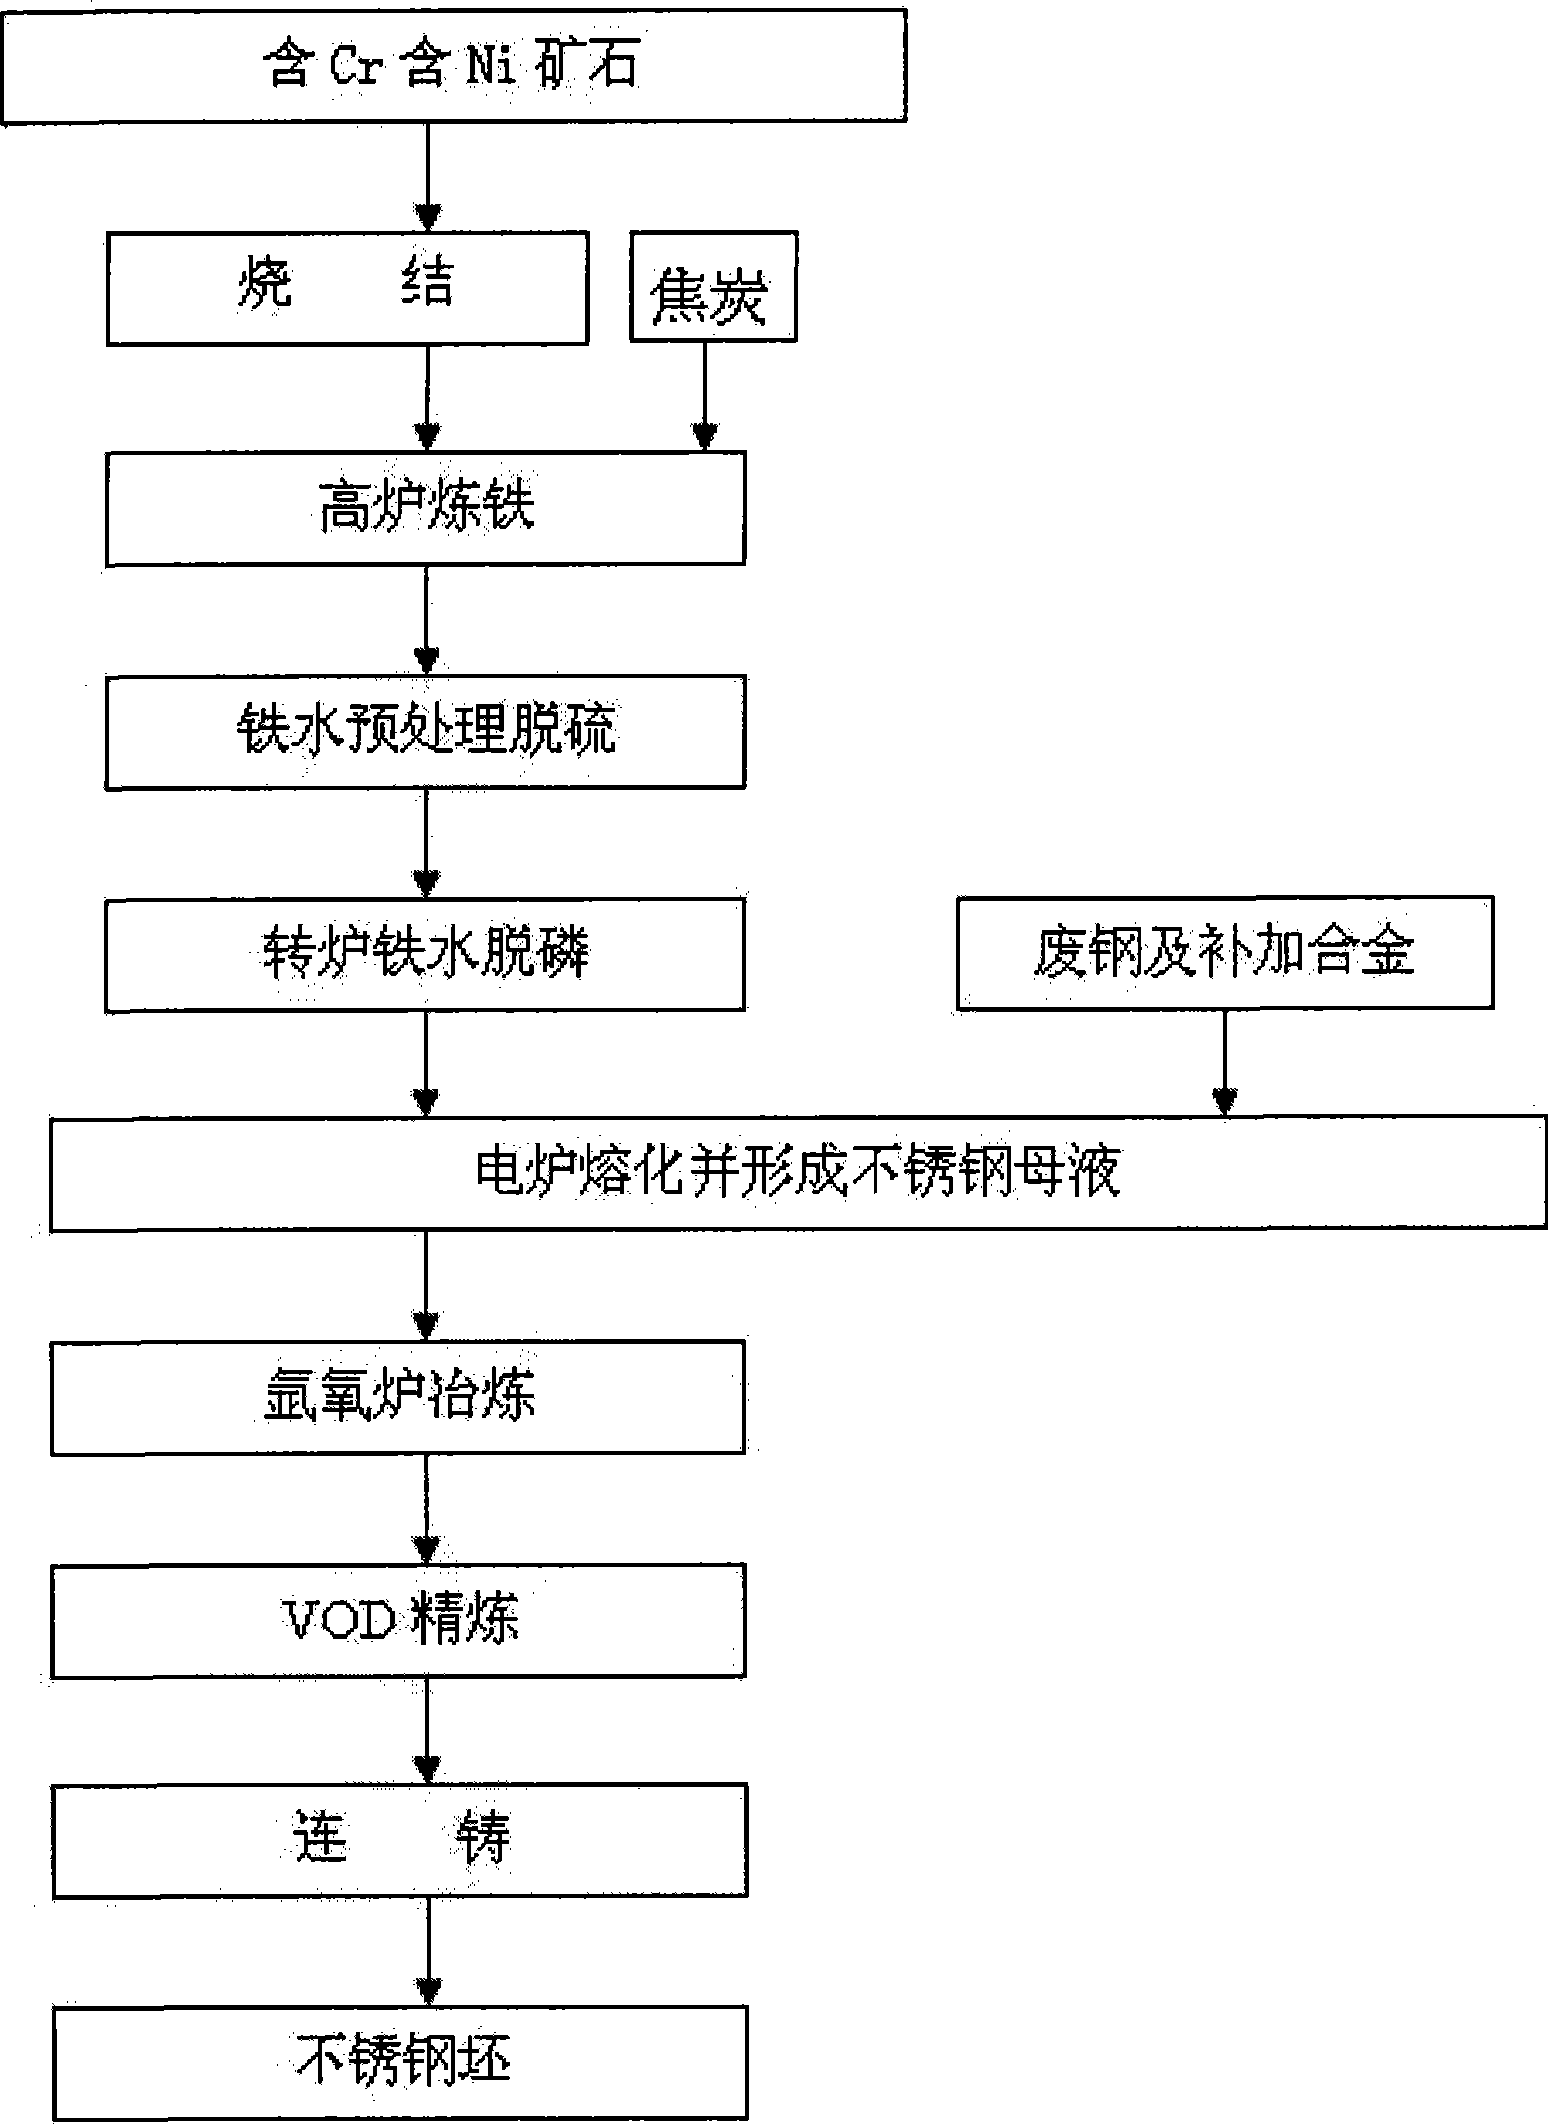 Ni-containing stainless steel smelting method